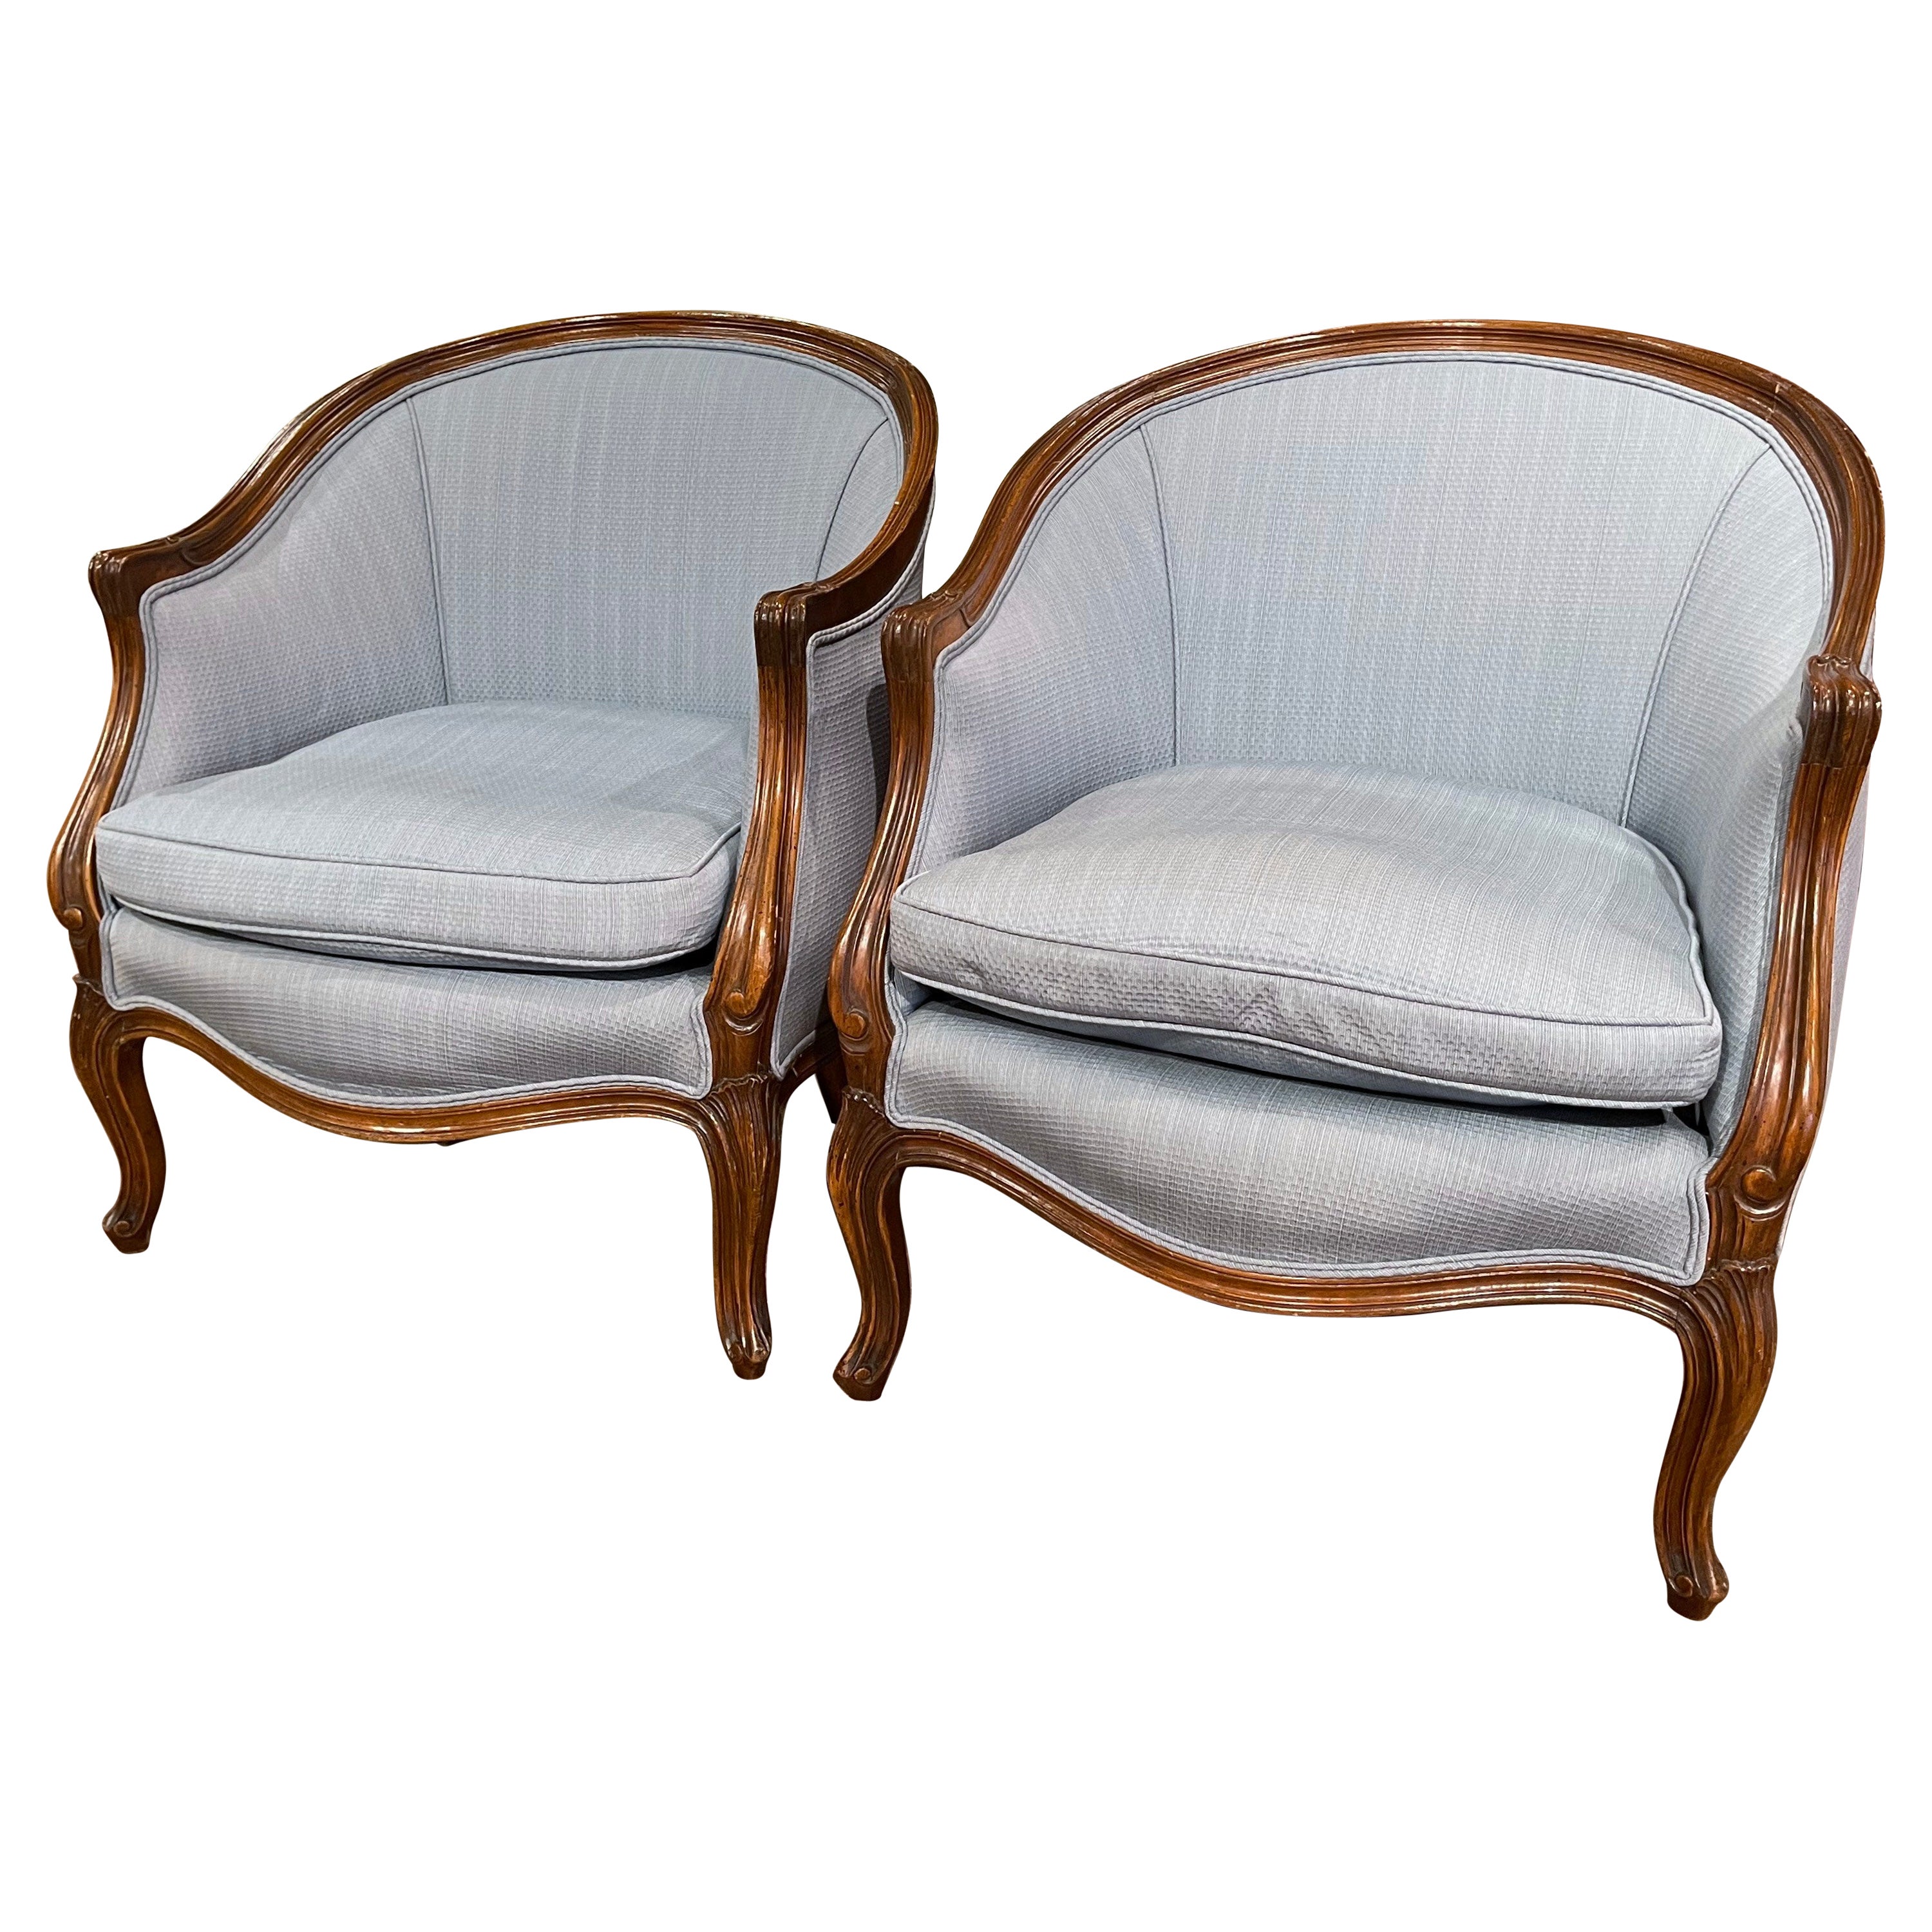 Pair of Early 20th Century French Louis XV Carved Walnut "Crapaud" Armchairs